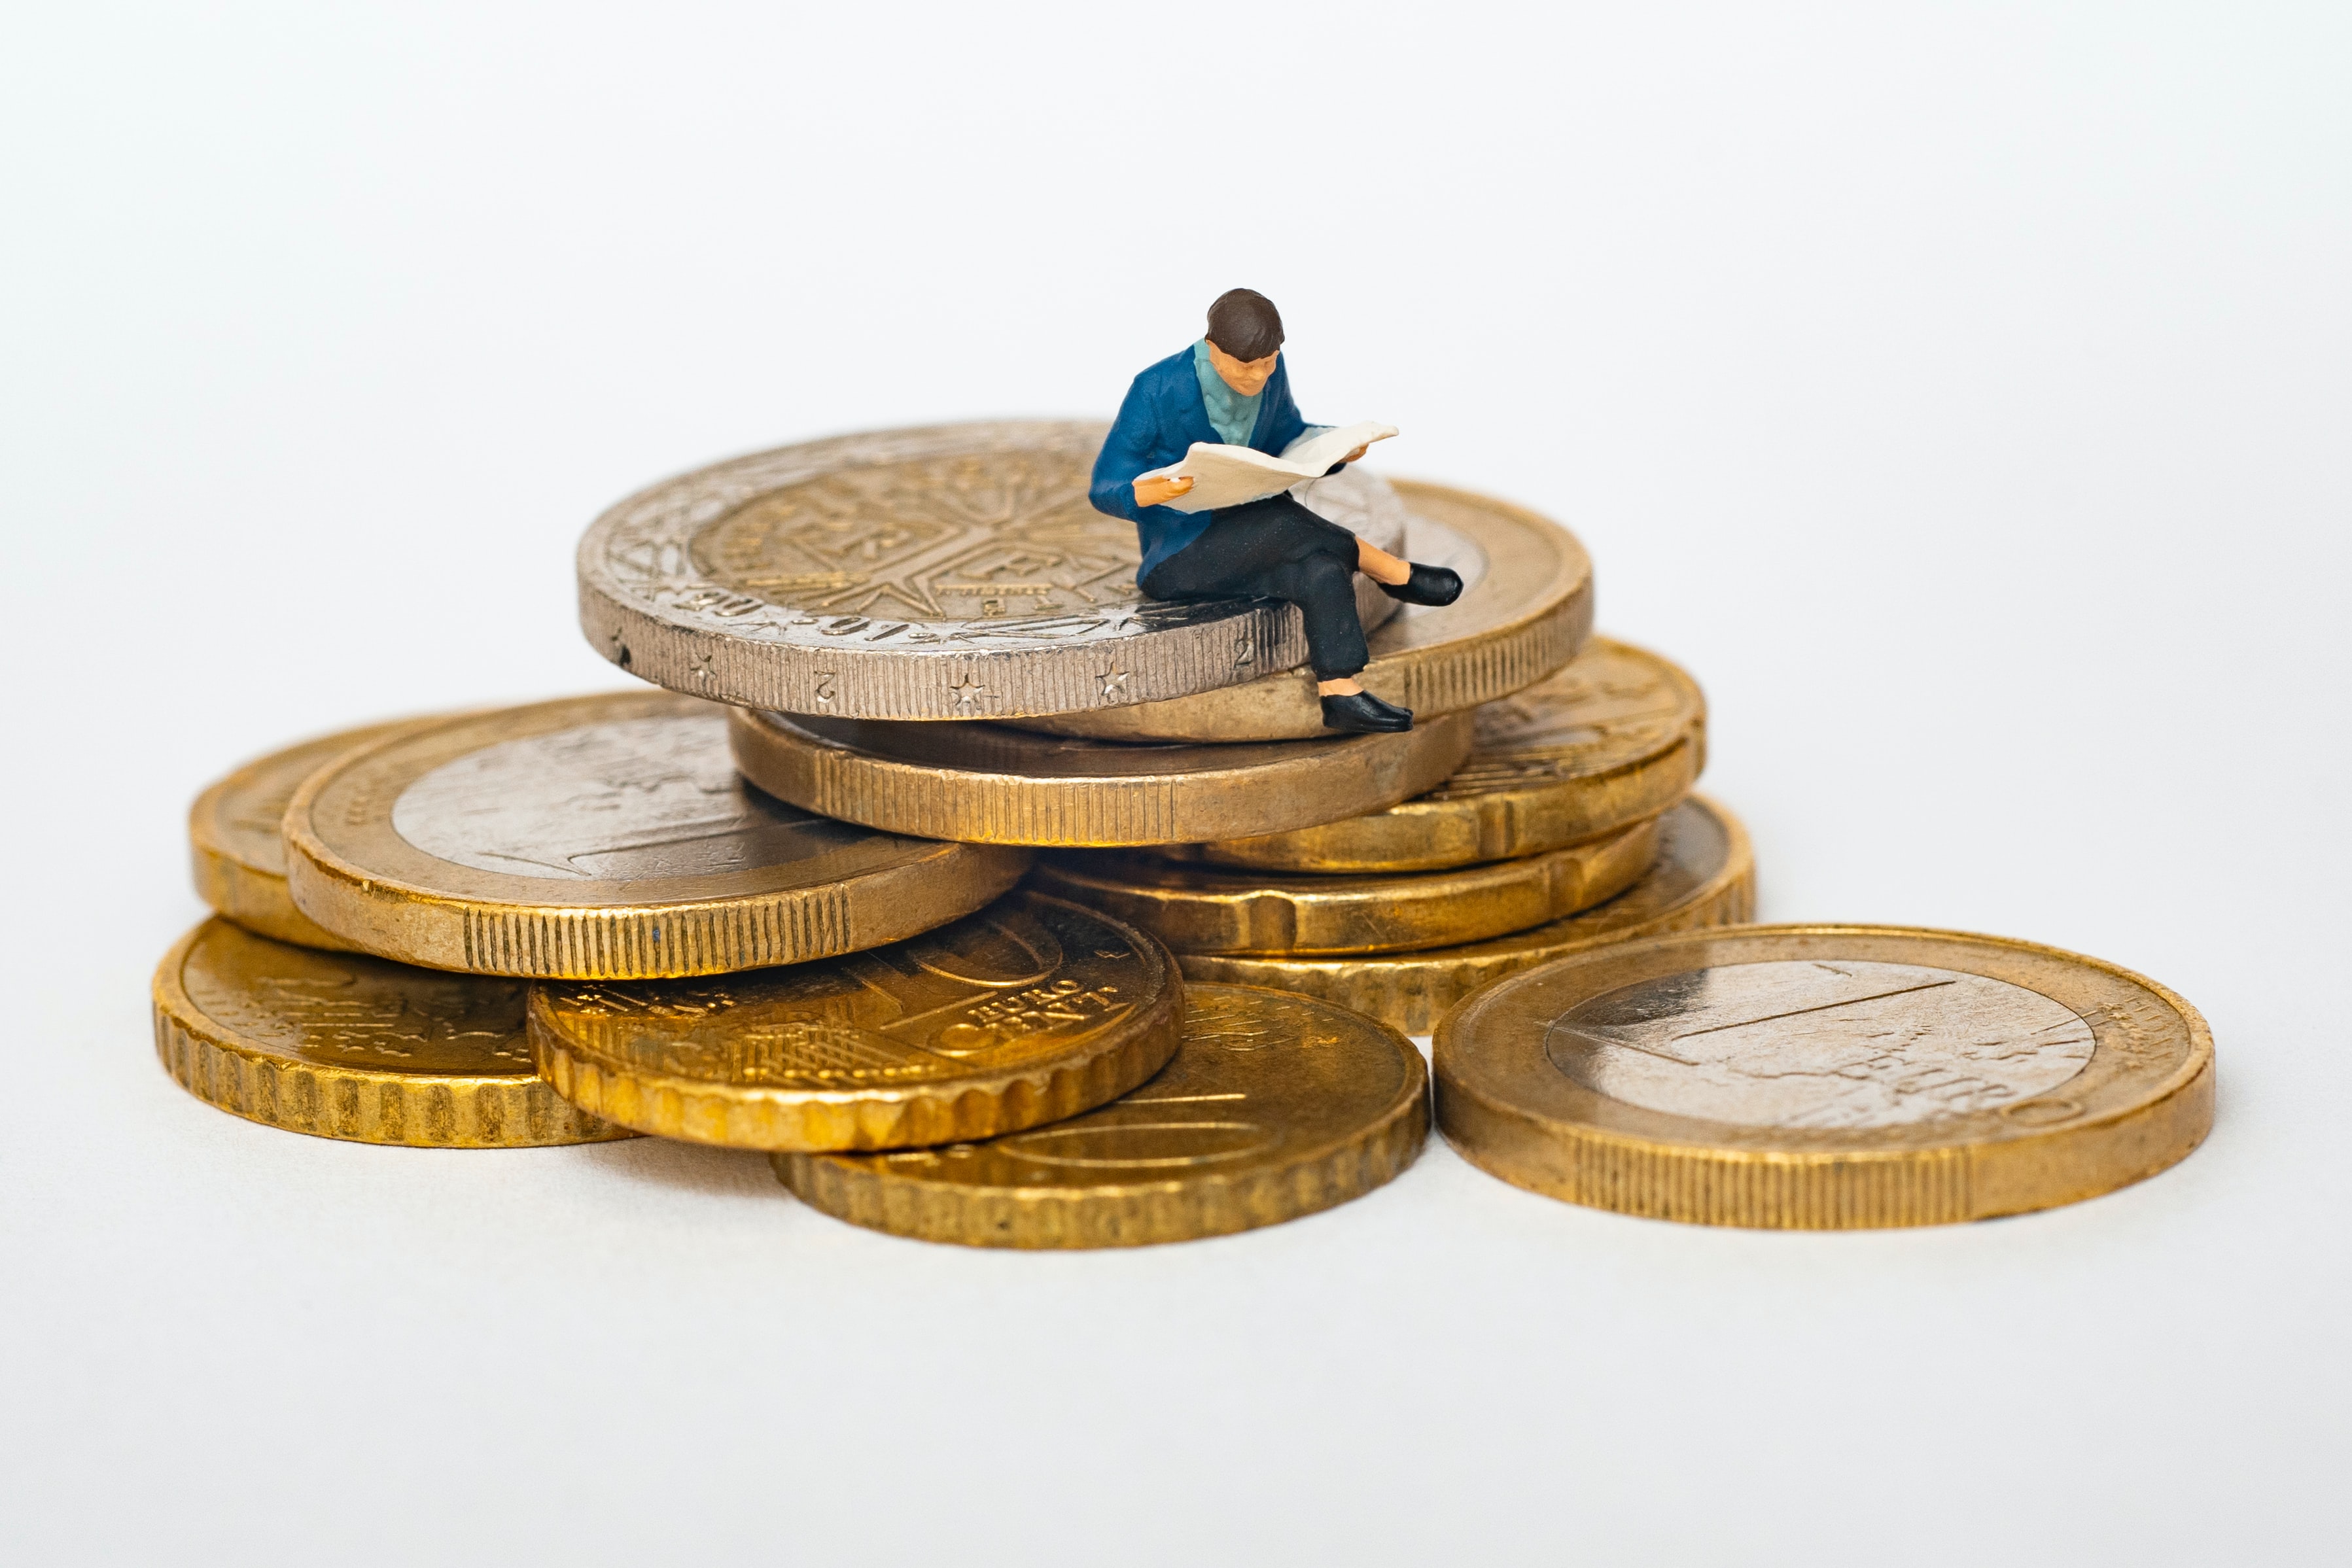 Figure of Man Reading Book Sitting on Coins